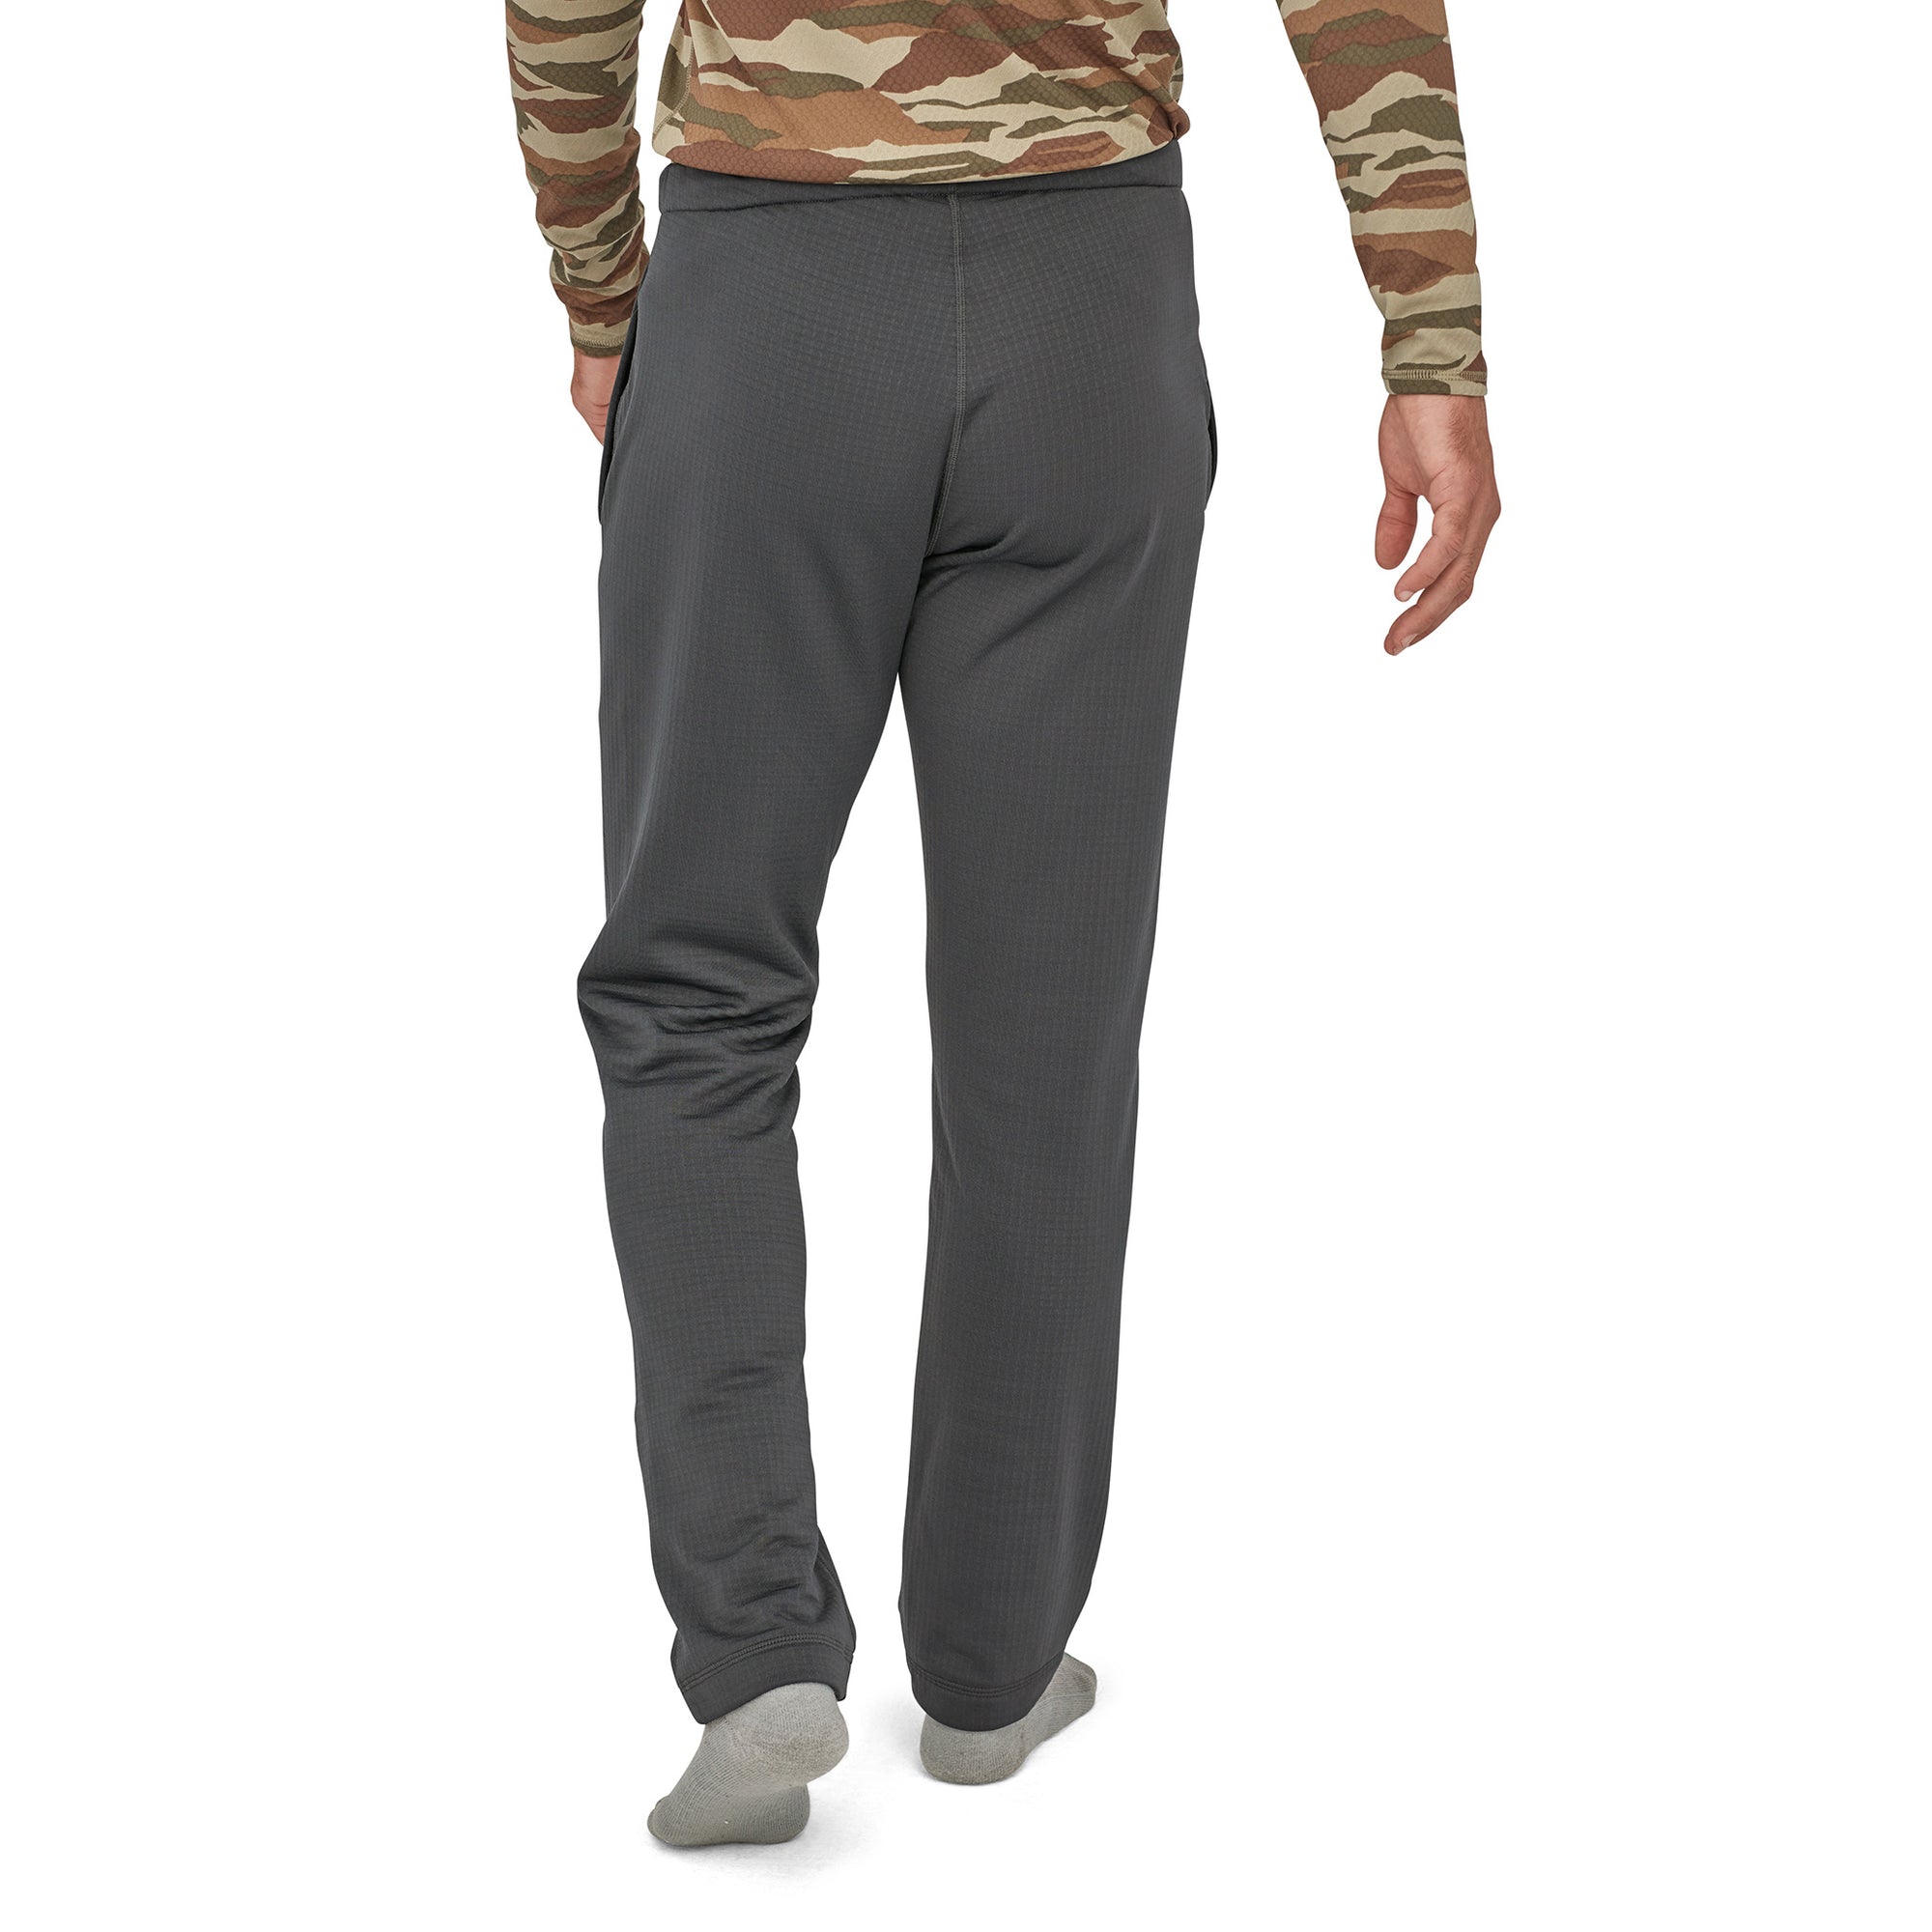 patagonia mens r1 pants in forge grey, back view on a model